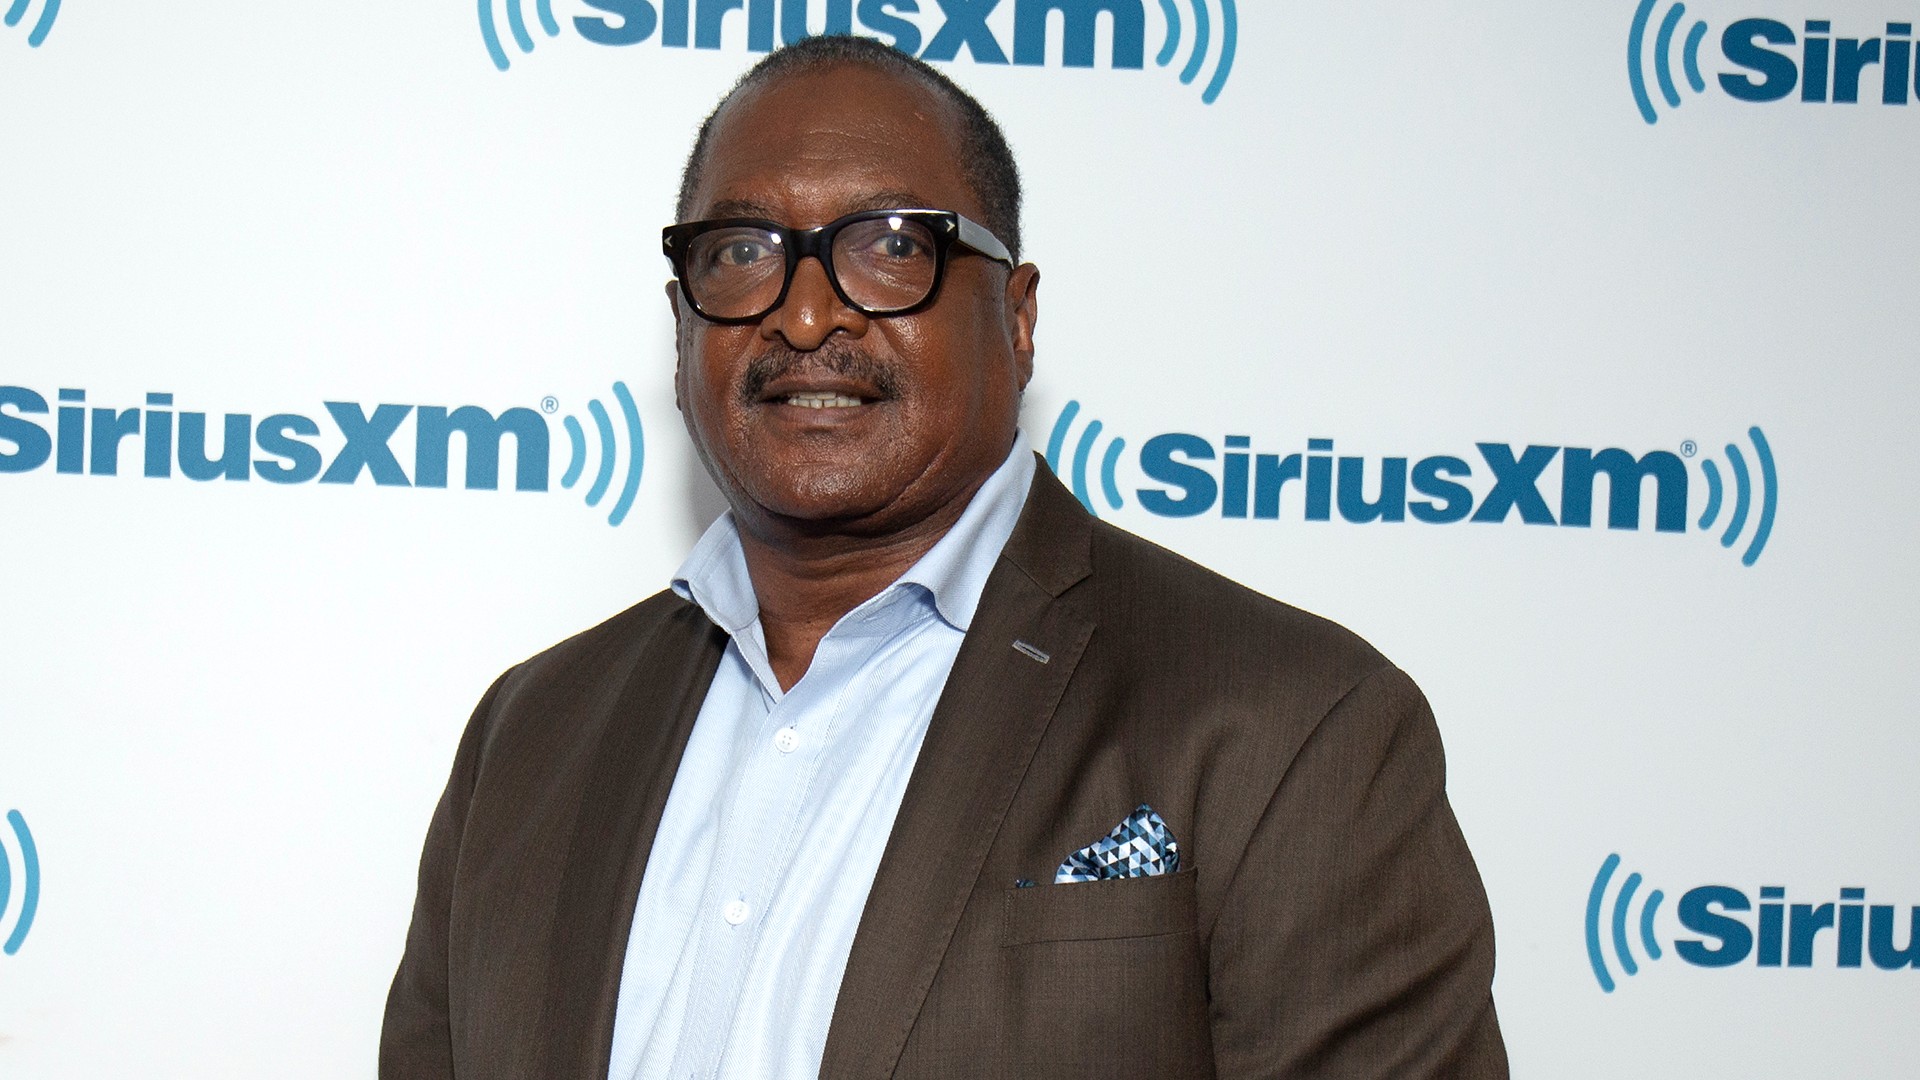 Coming Soon! Beyonce's Father Mathew Knowles' Memoi To Be Adapted Into Film, TV Show